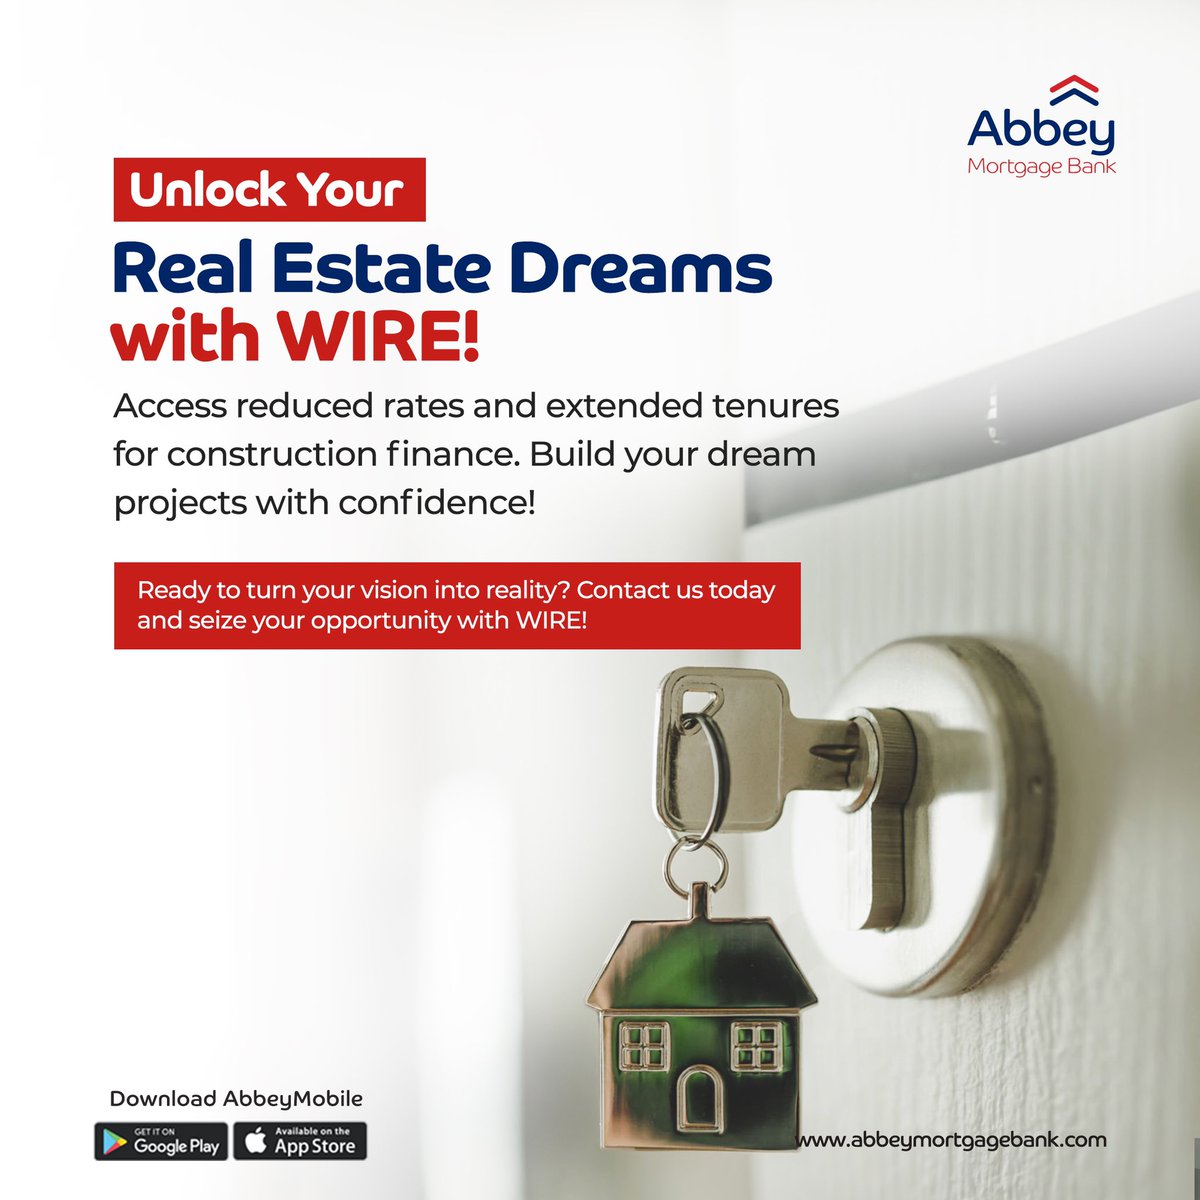 Calling all trailblazing women in real estate! Step up your game with WIRE Loan – designed to help you achieve your real estate dreams for less! Ready to make your mark? Contact us to get started

#WomenInRealEstate 
#Abbeyis32 
#AbbeyMortgageBank